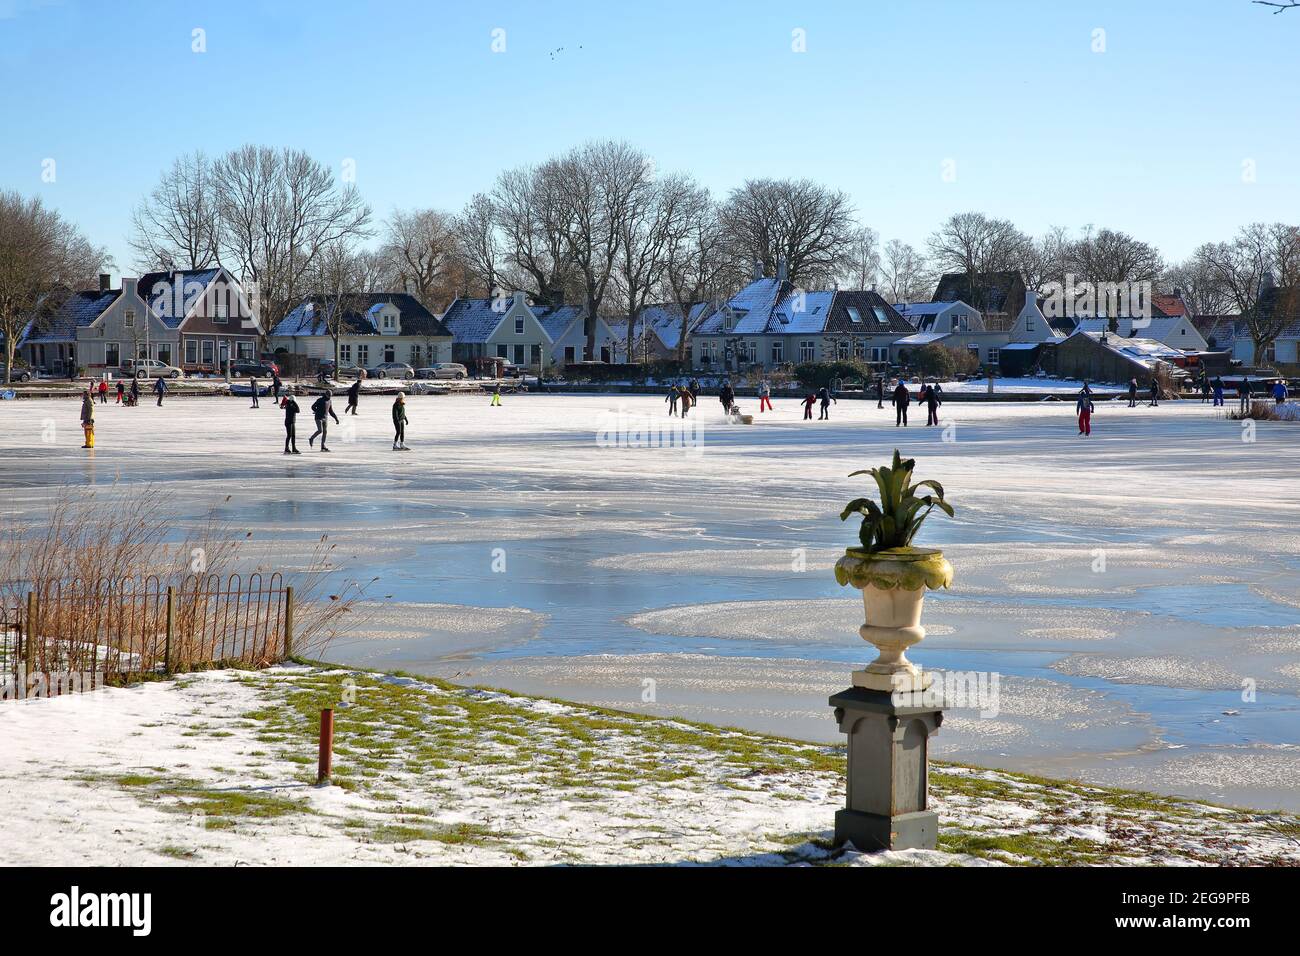 Winter snow and people ice skating on frozen water in Broek in Waterland, a small town with traditional old and painted wooden houses, North Holland, Stock Photo